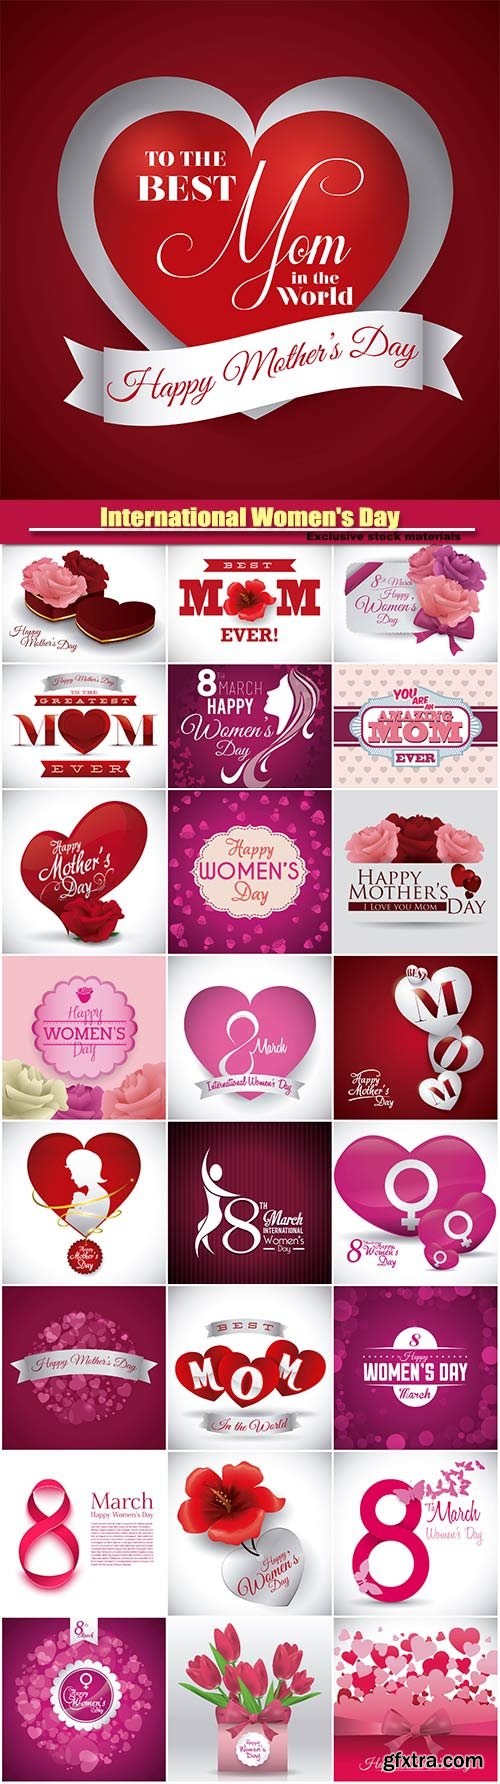 International Women\'s Day, 8 March backgrounds vector